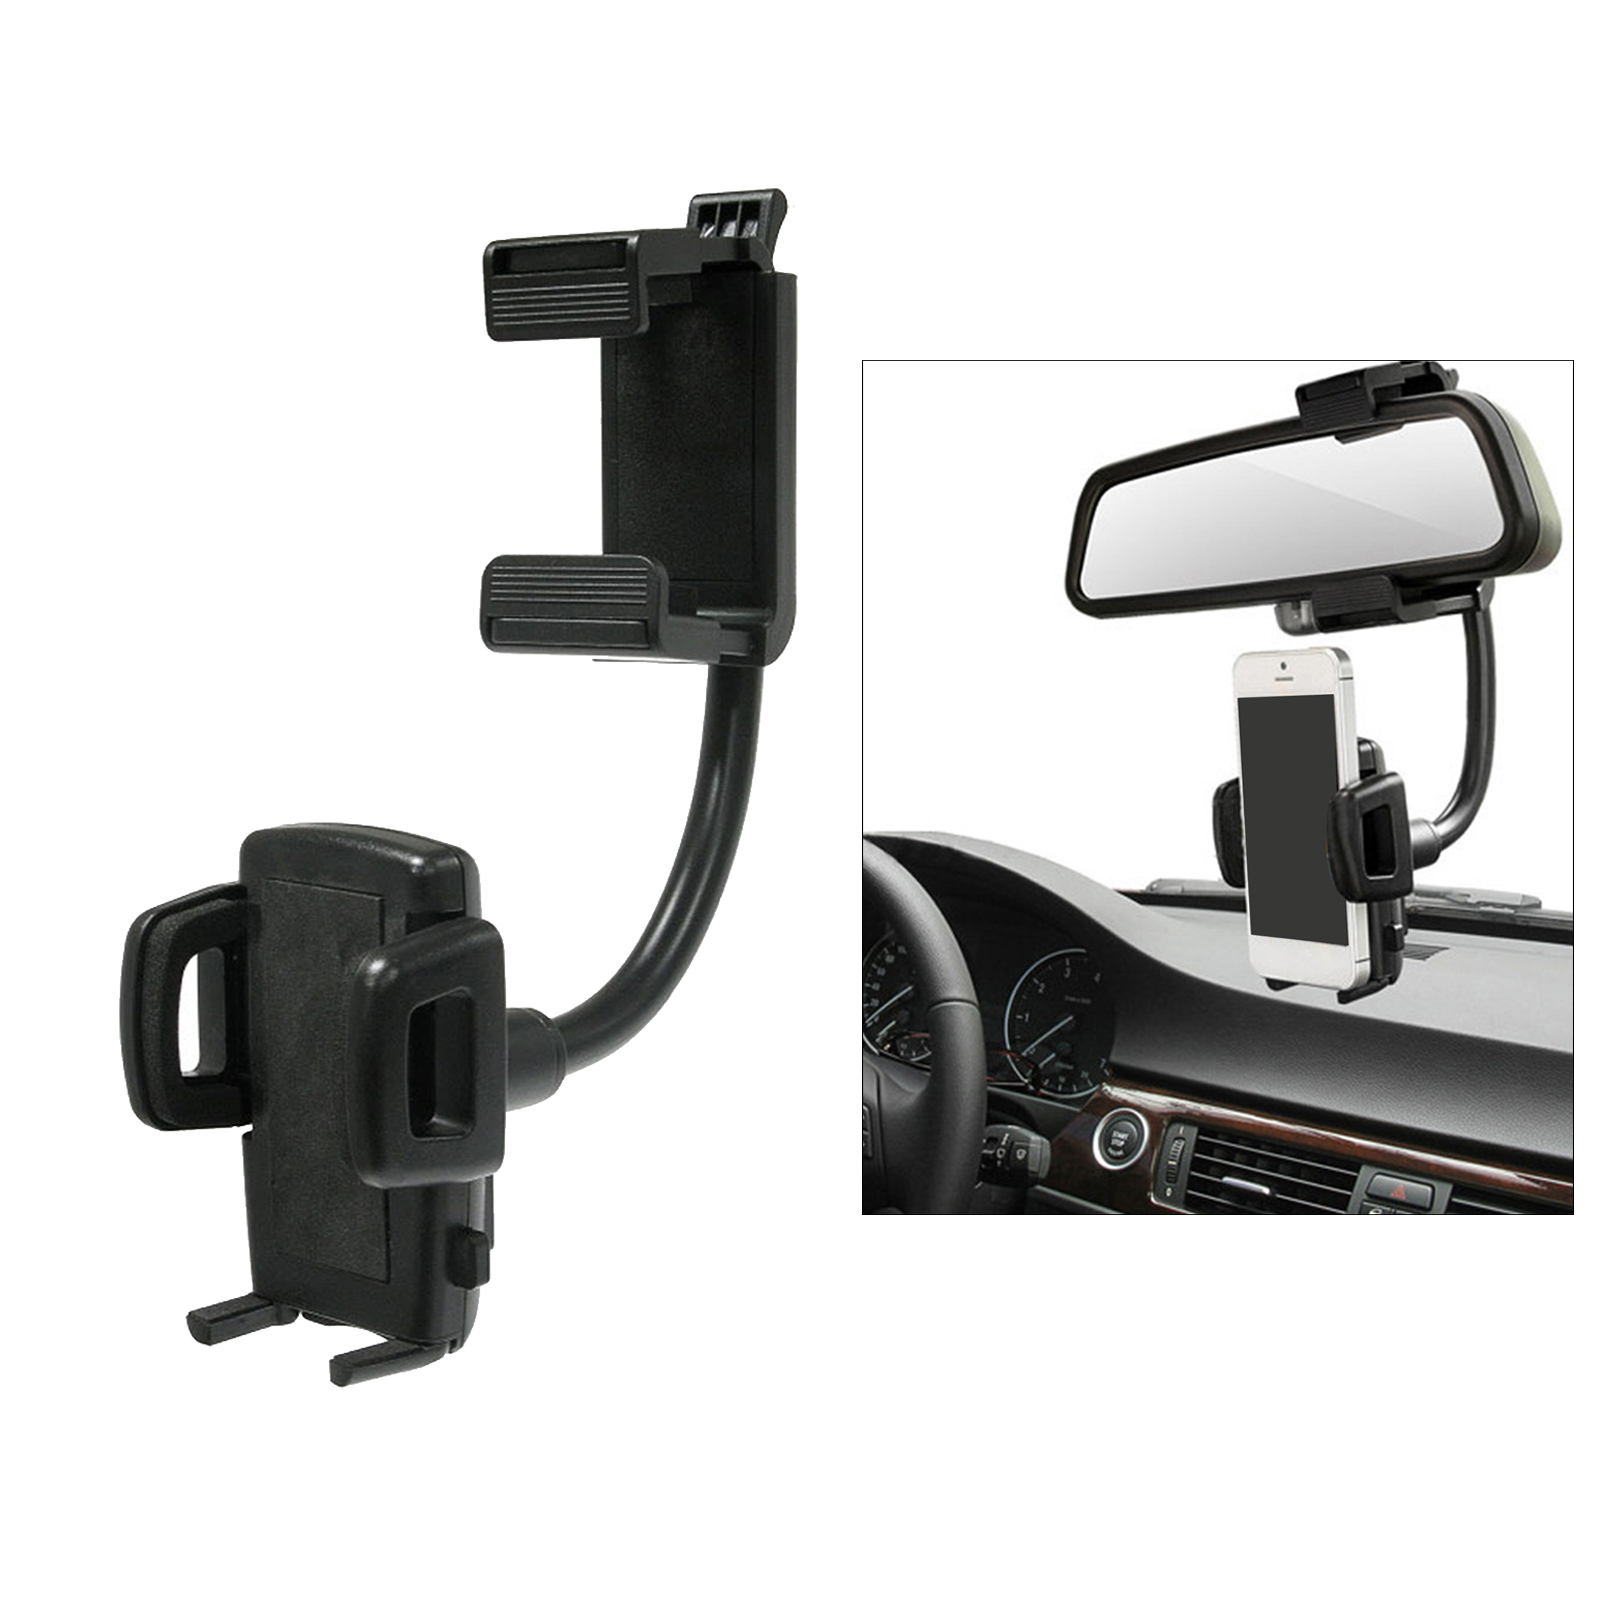 Rear View Mirror Car Mount Phone Holder Mount for Smartphones GPS Units